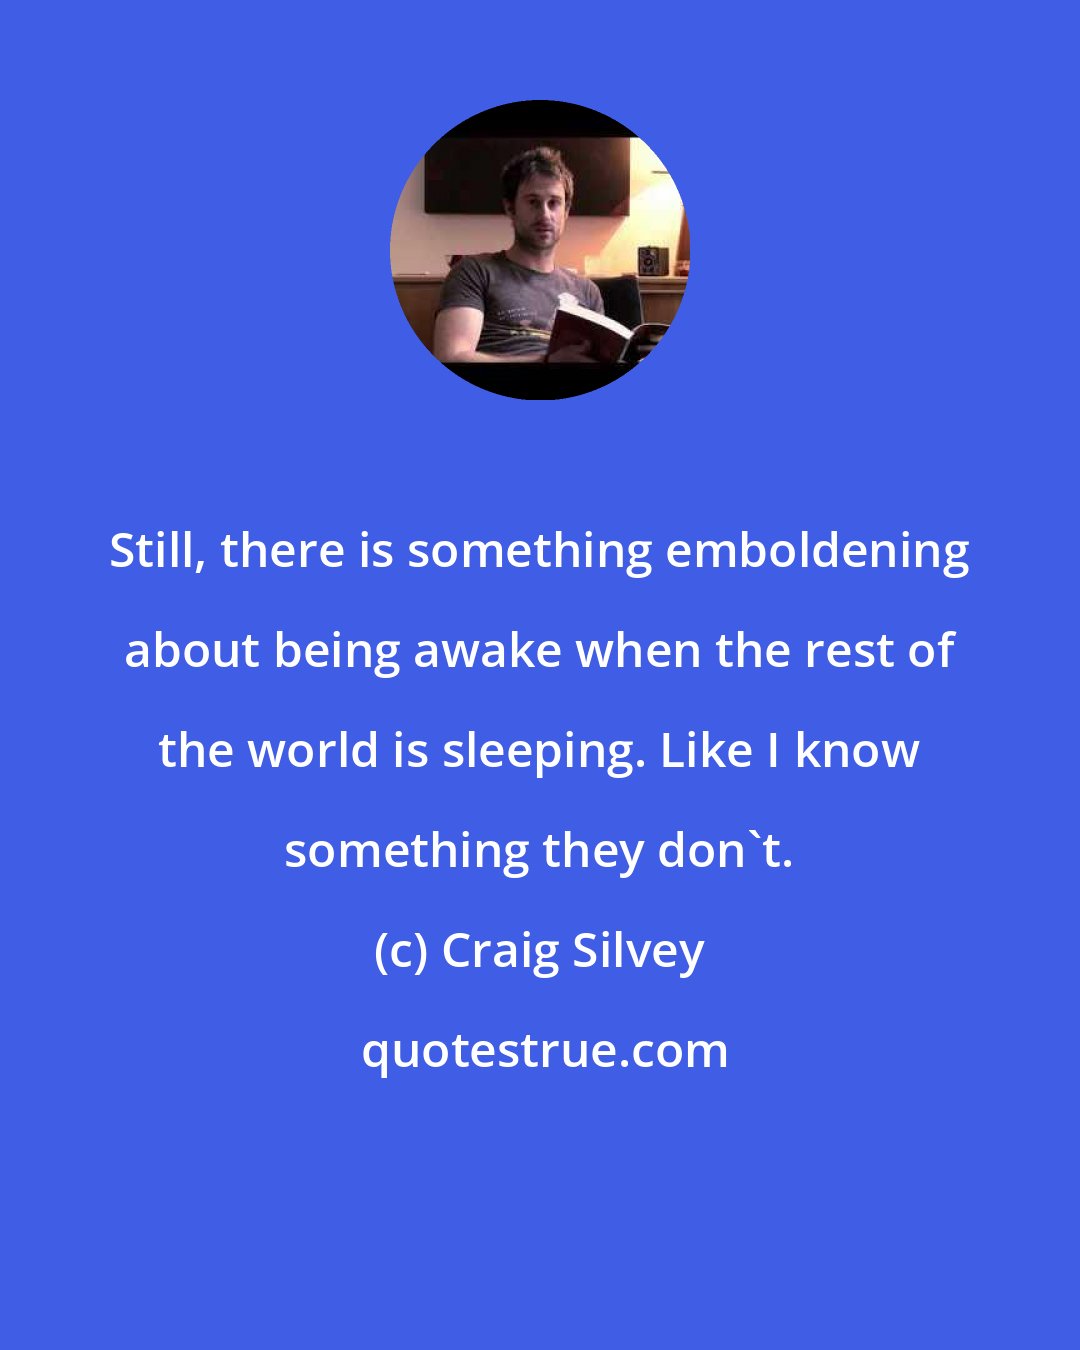 Craig Silvey: Still, there is something emboldening about being awake when the rest of the world is sleeping. Like I know something they don't.